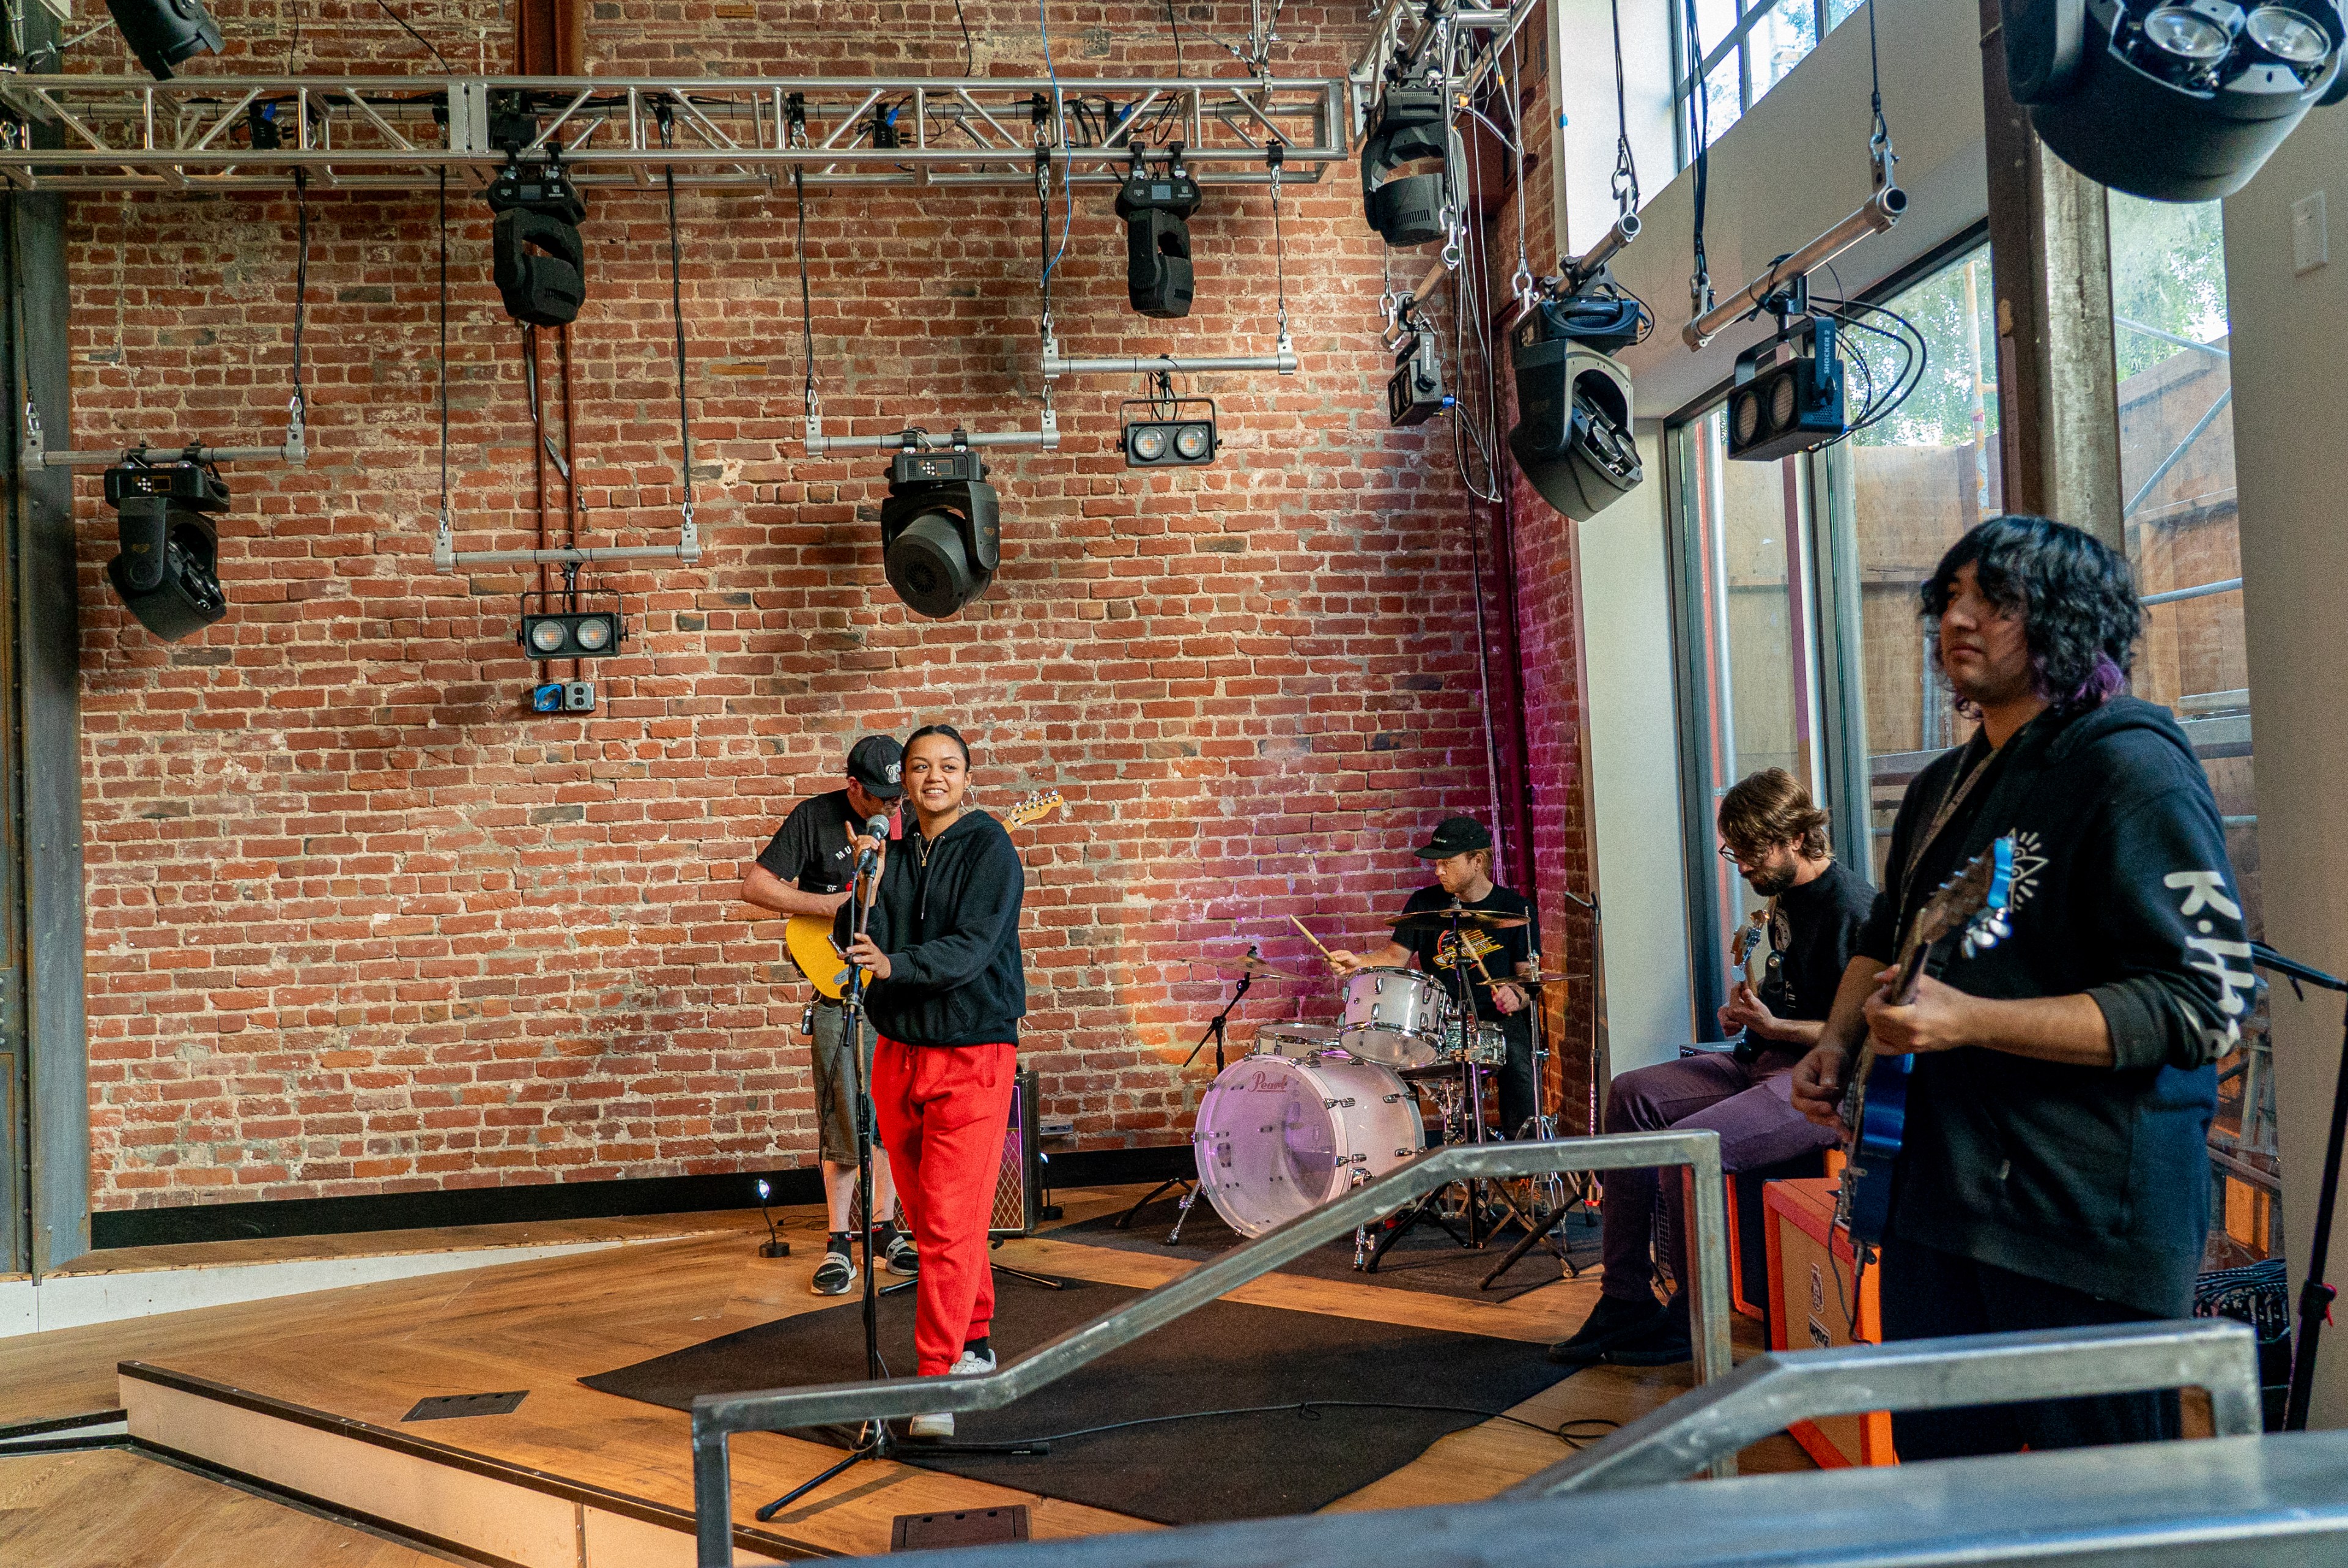 Musicians play guitars and drums in a performance space with wooden floors and a brick wall.